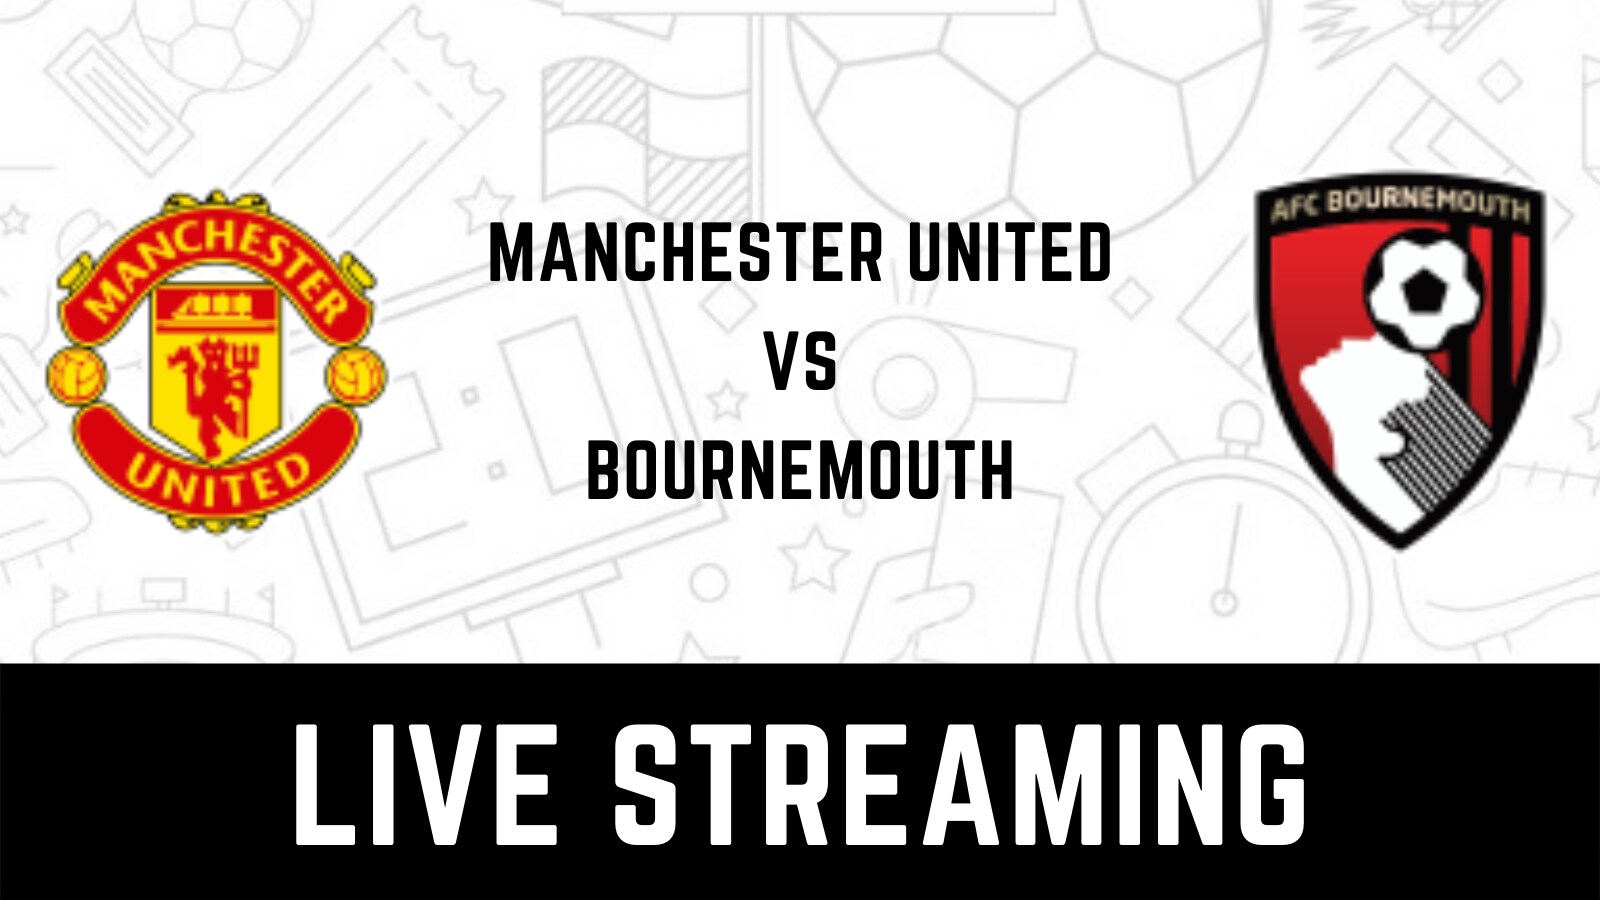 Manchester United vs AFC Bournemouth Premier League Live Streaming When and Where to Watch Manchester United vs AFC Bournemouth